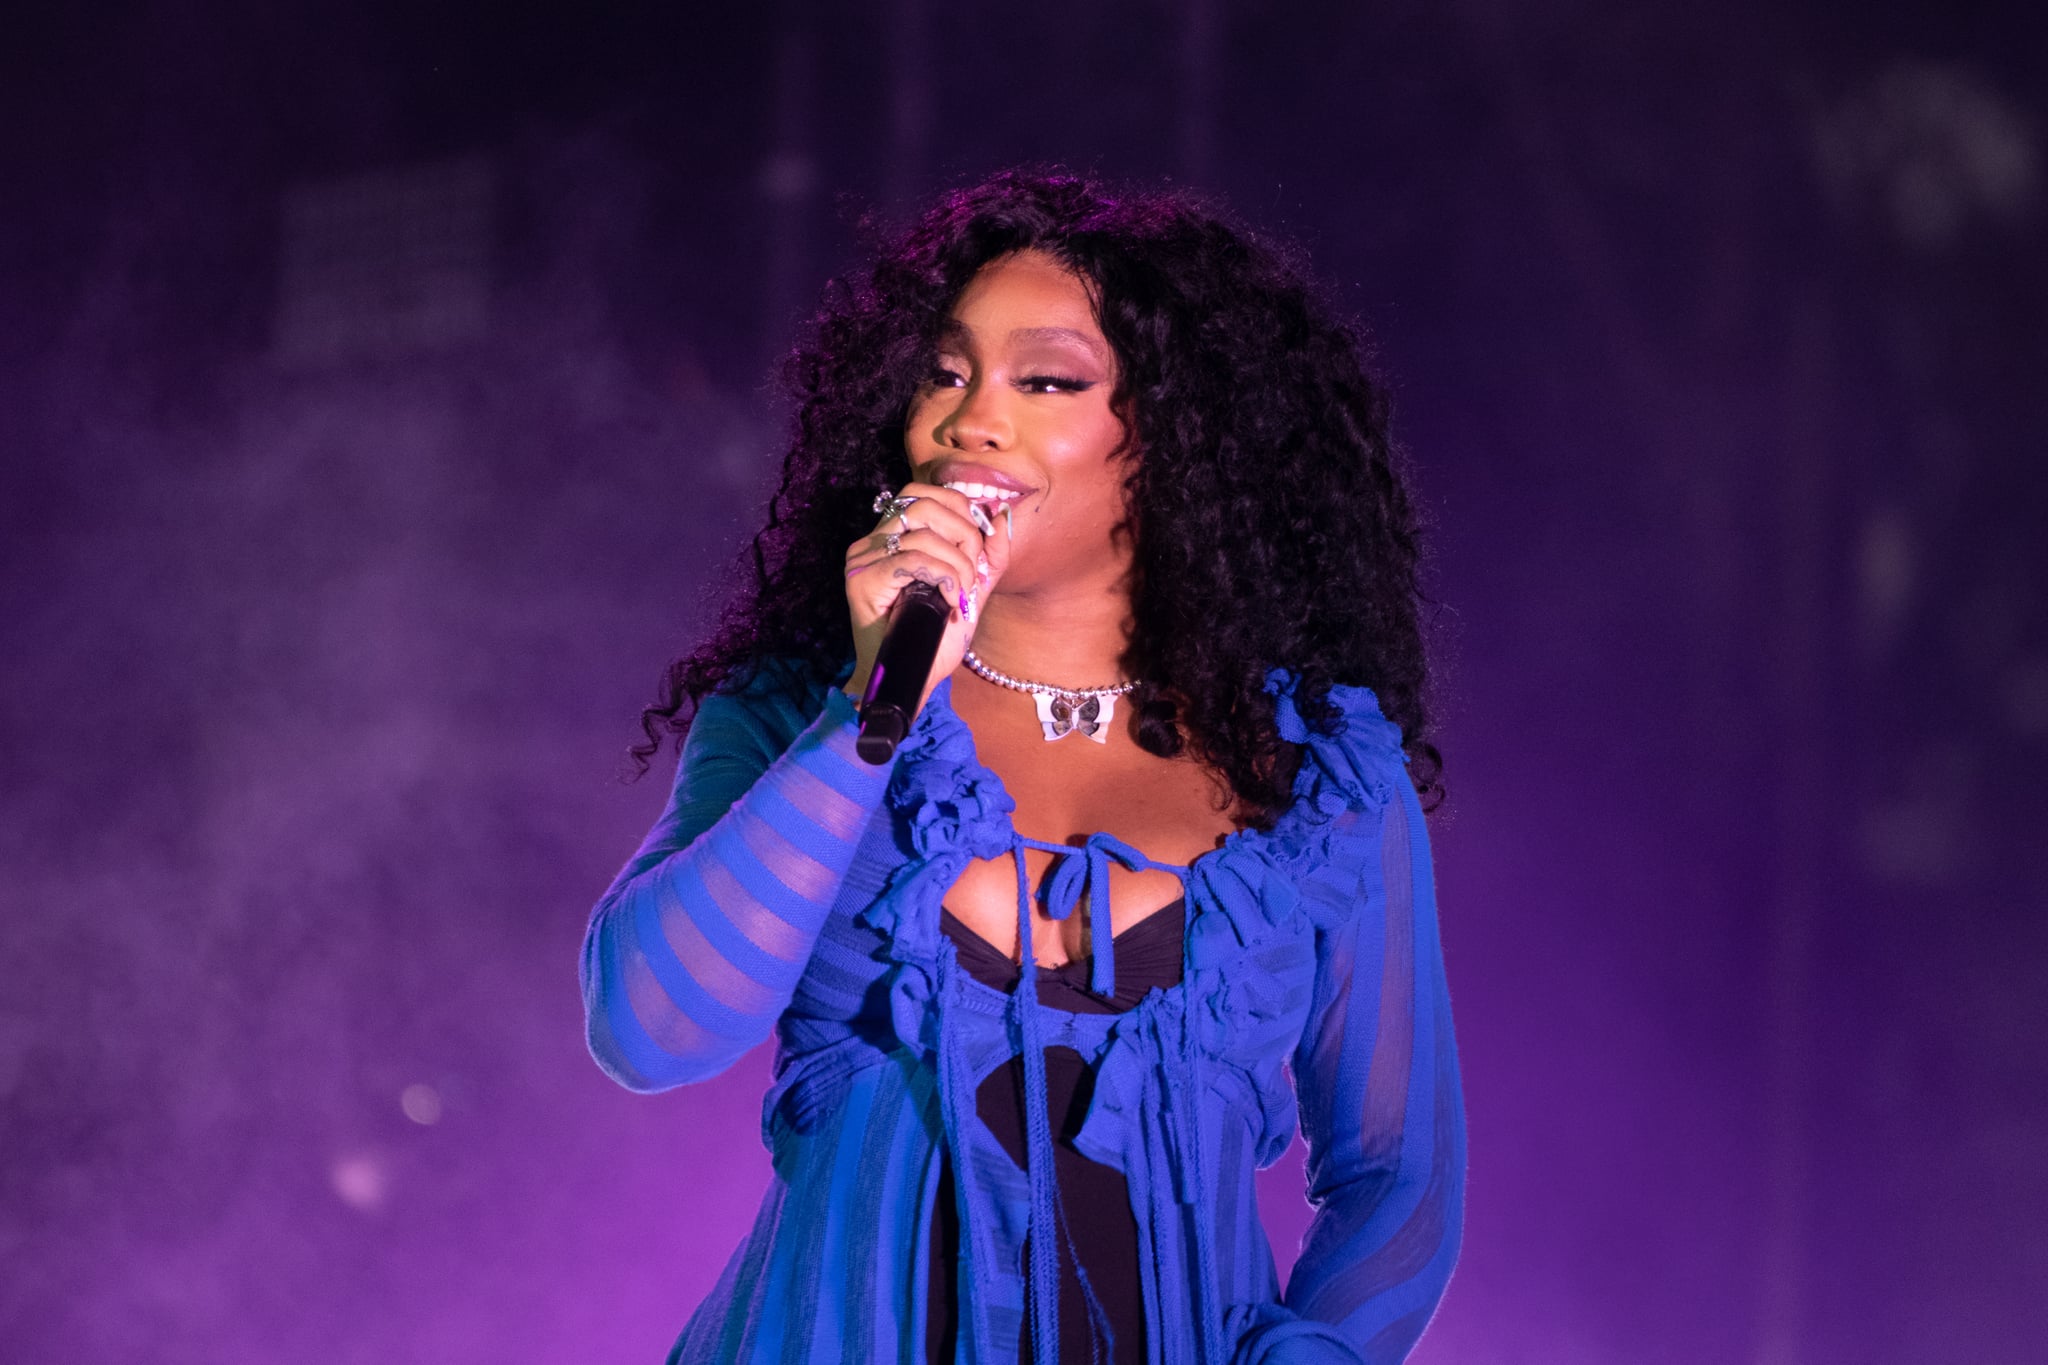 LONDON, ENGLAND - JULY 08: (Editorial Use Only) Sza performs on the main stage during Wireless Festival at Finsbury Park on July 08, 2022 in London, England. (Photo by Joseph Okpako/WireImage)